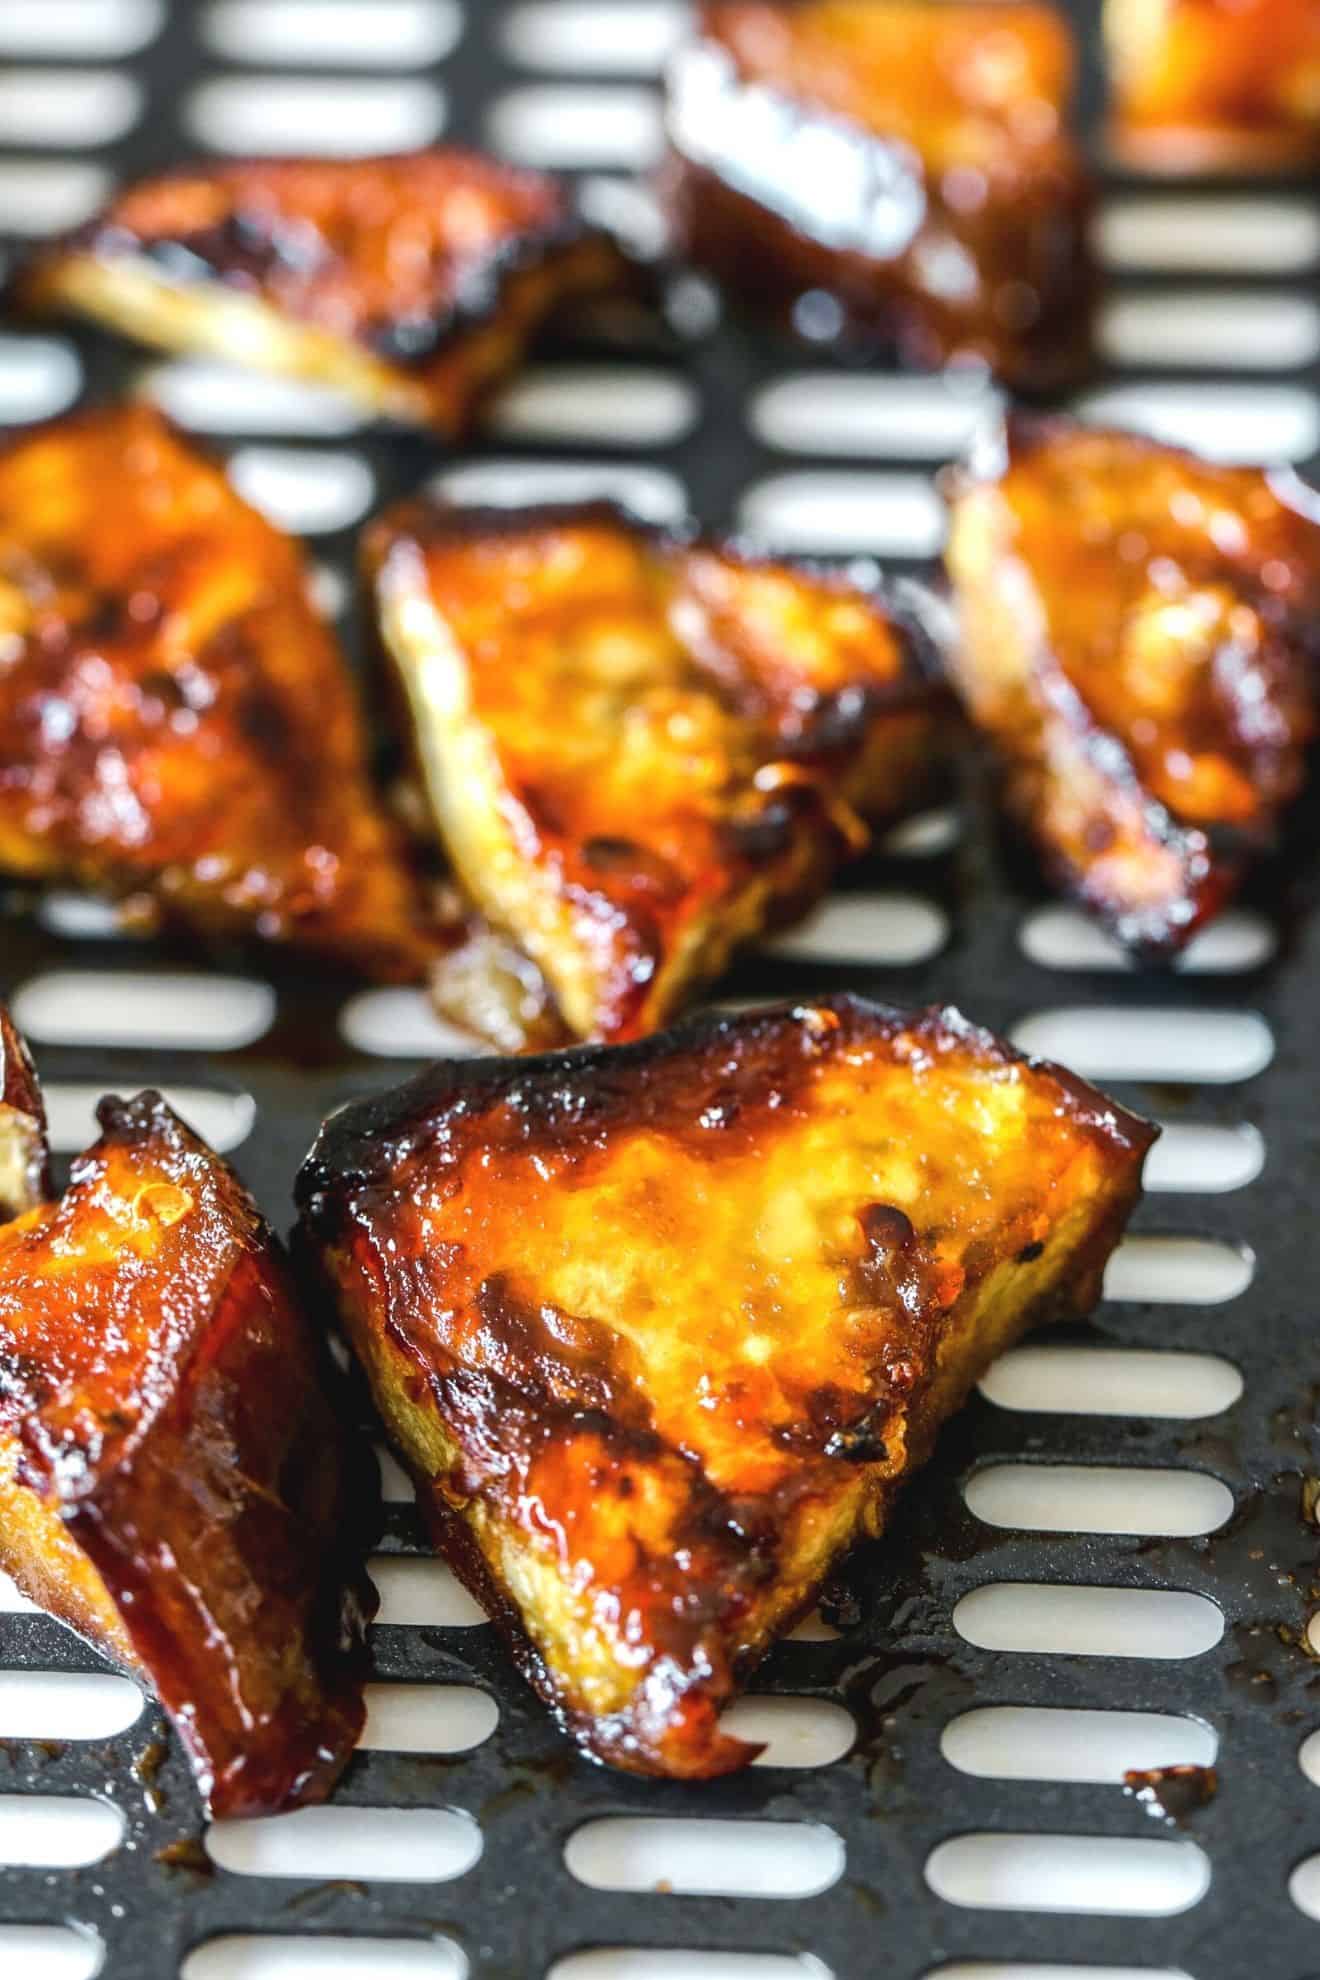 This is a side view of an air fryer tray with caramelized and glazed eggplant pieces.